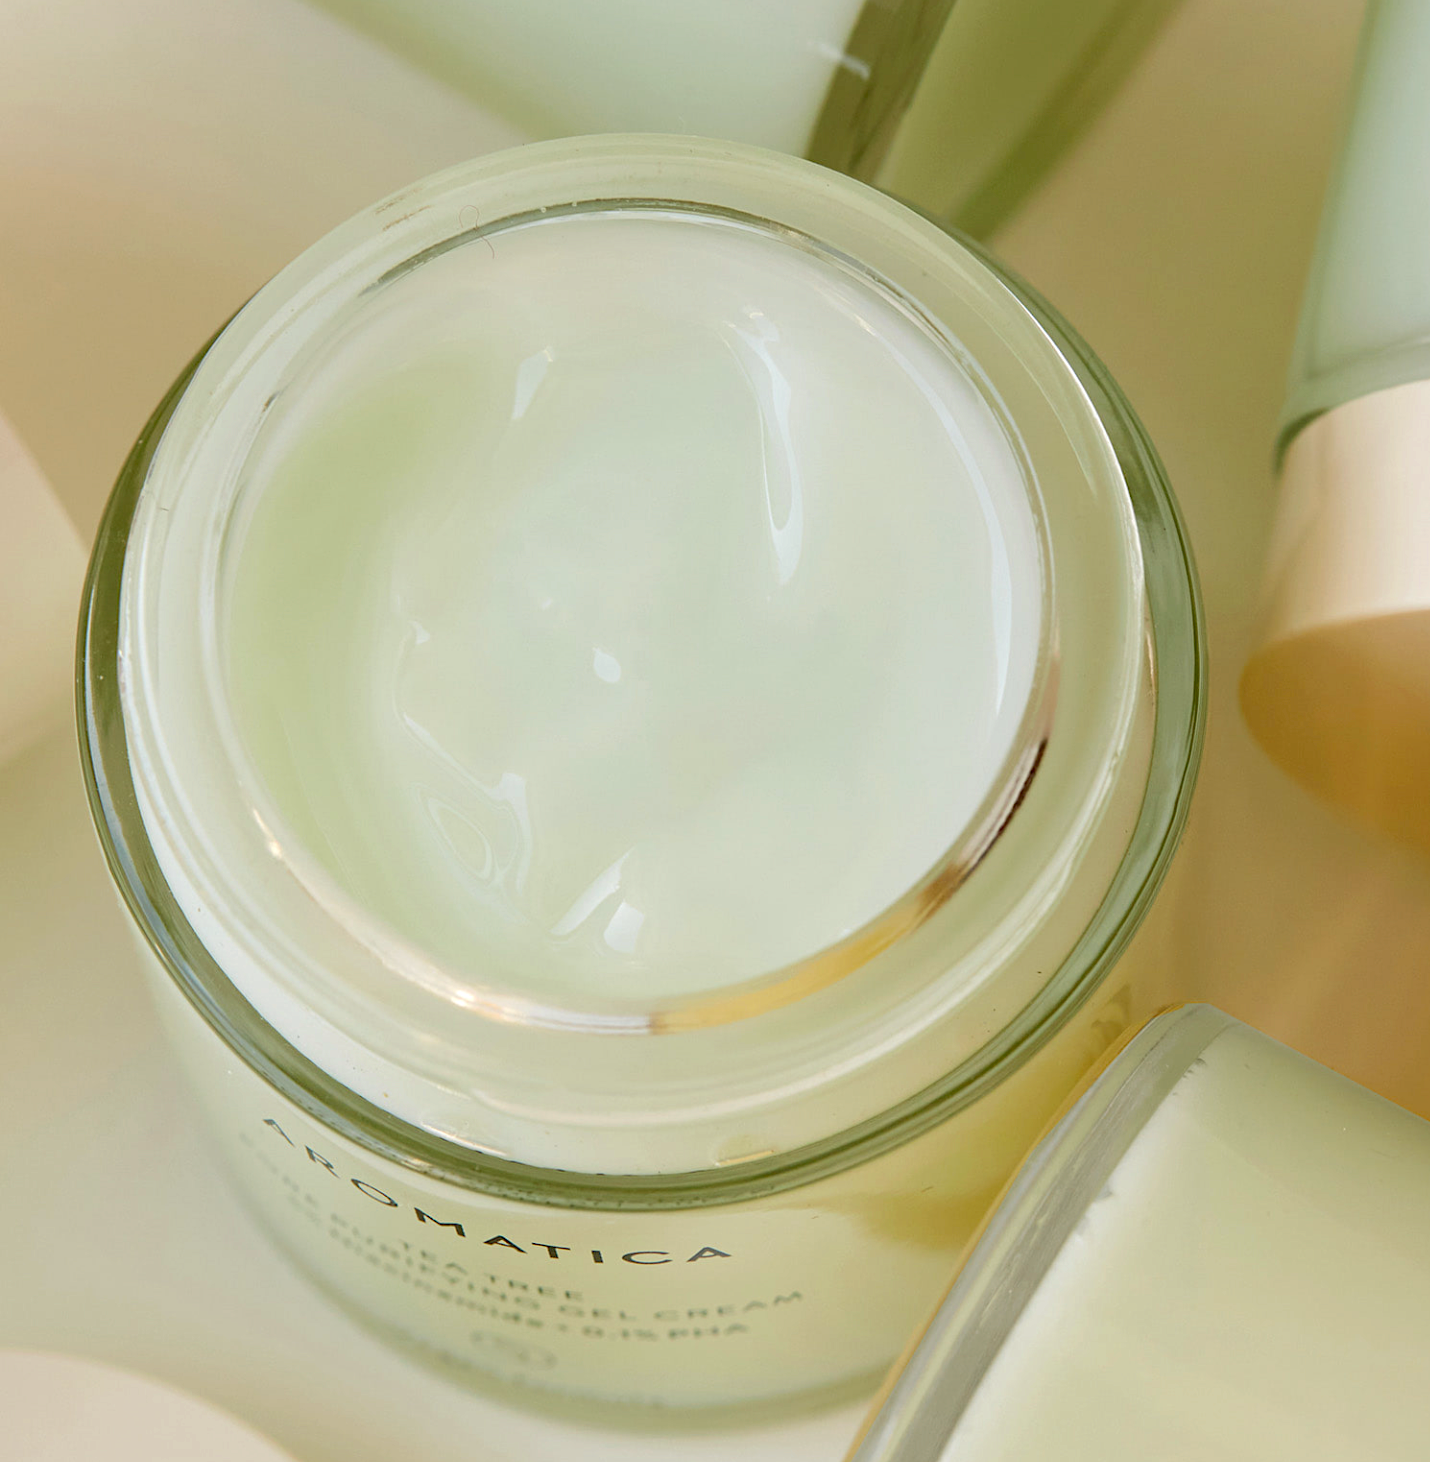 Opened jar of silky and creamy texture in a pale touch of green minty color